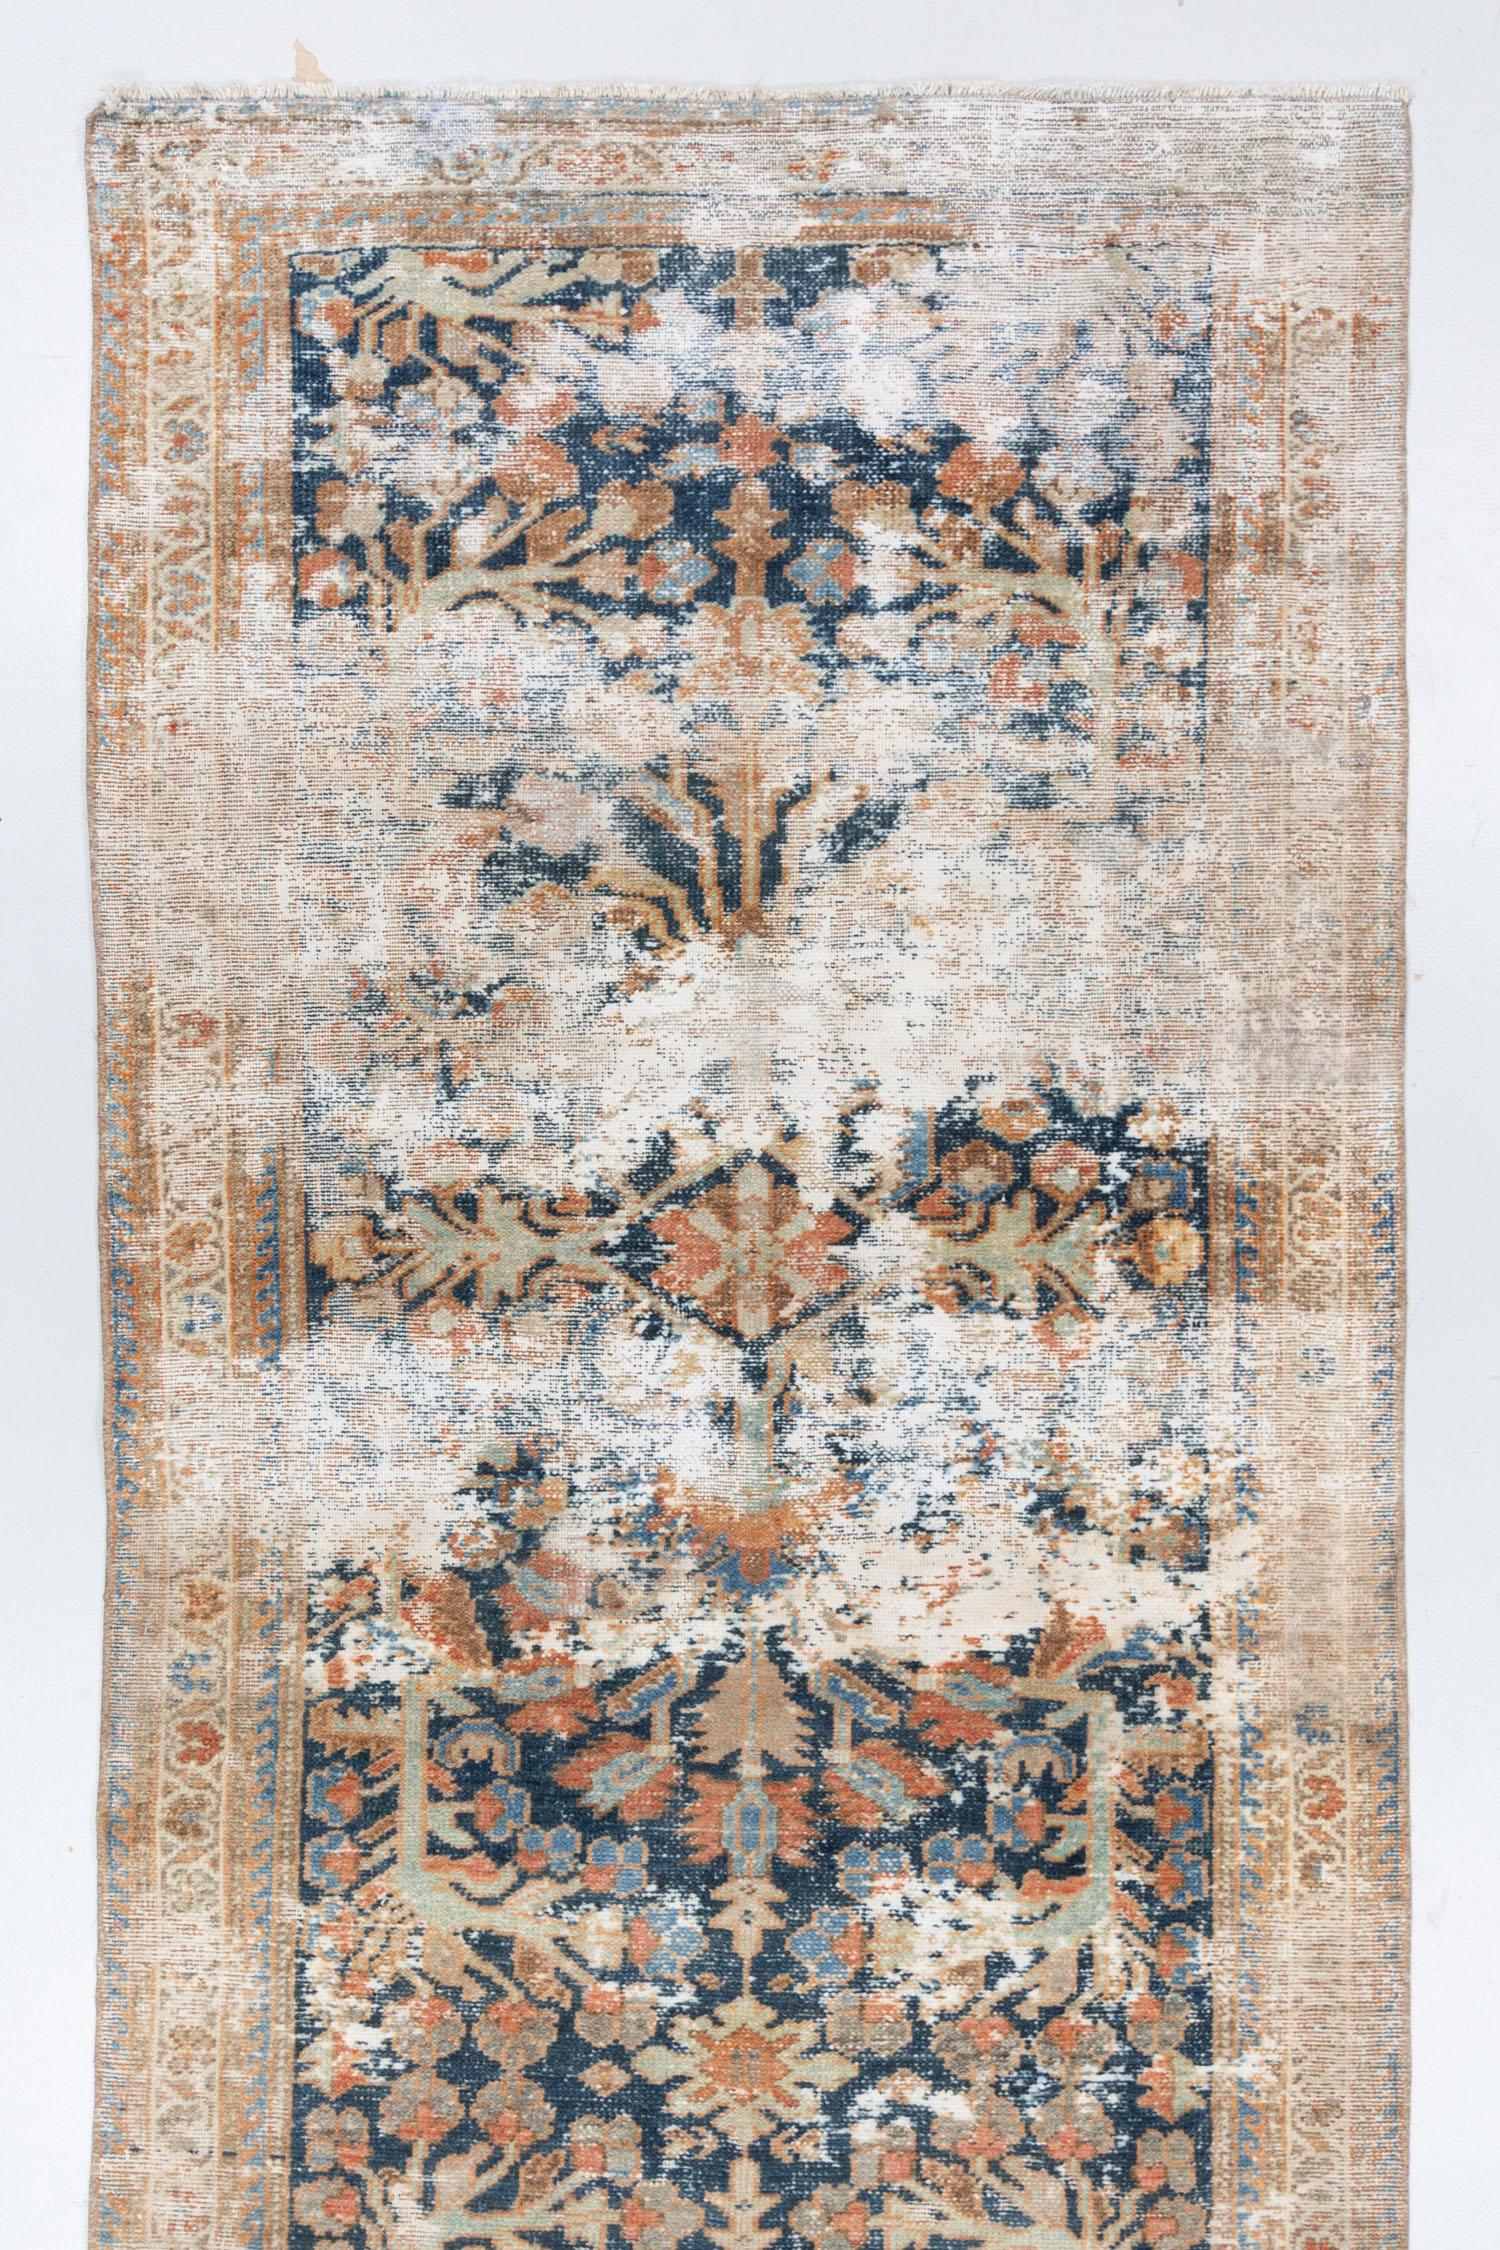 West Asian Vintage Persian Distressed Runner Rug R2600 For Sale